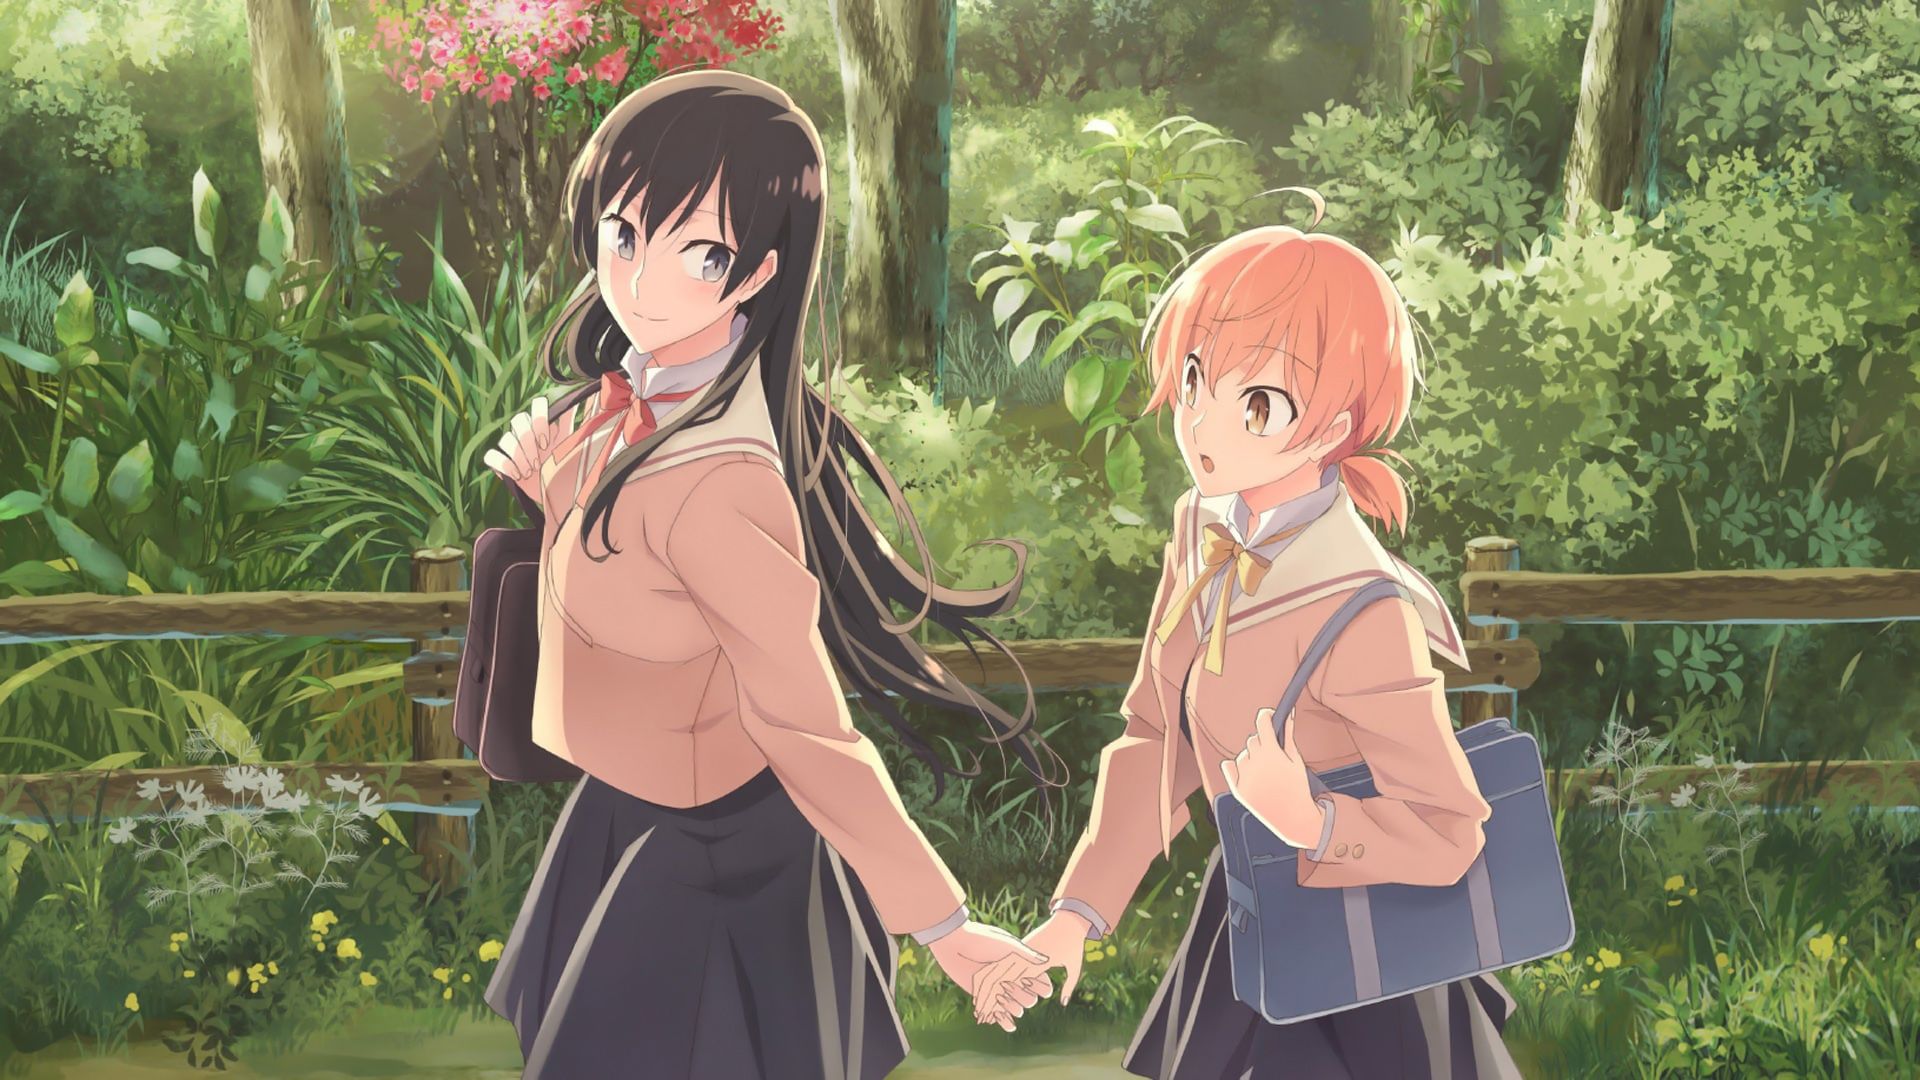 Bloom Into You background